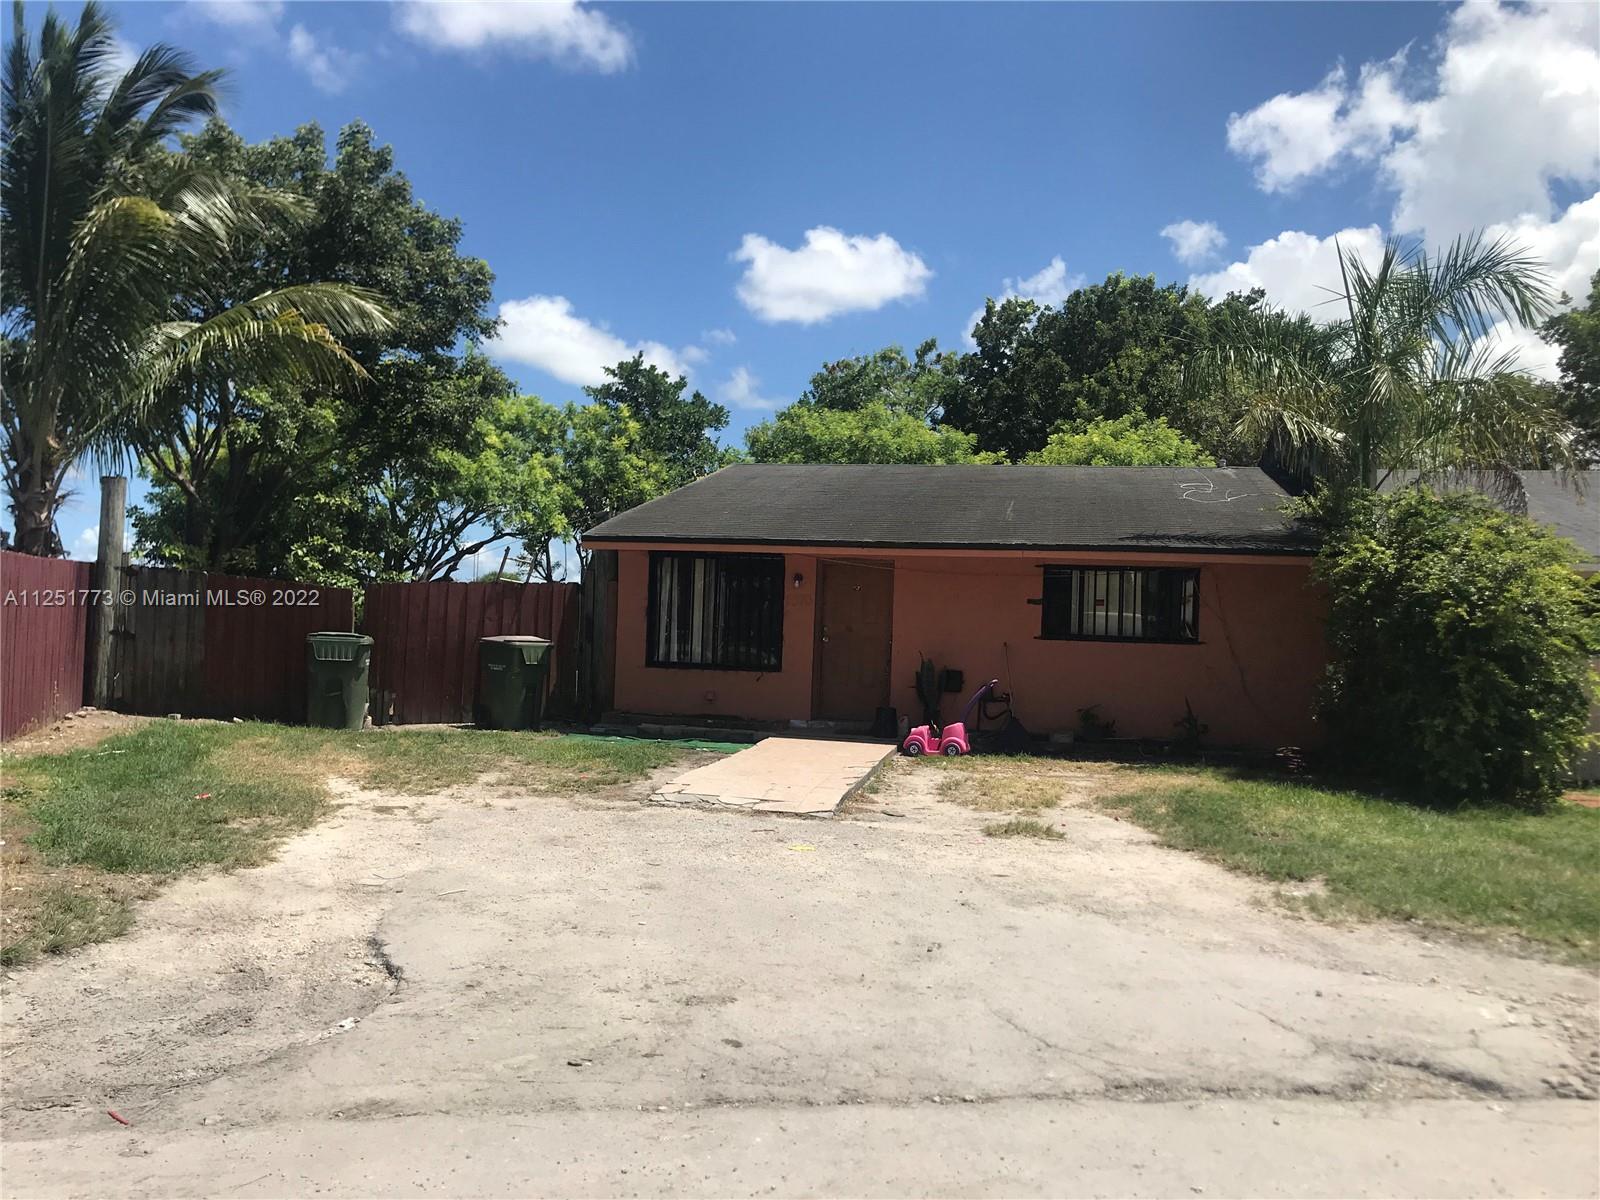 One story villa 3 bedrooms 2 baths ceramic tiles throughout the entire house/ corner lot / biggest backyard in this subdivision/ front of Harris field park, One block of bus stop, US1, supermarkets, schools, turnpike